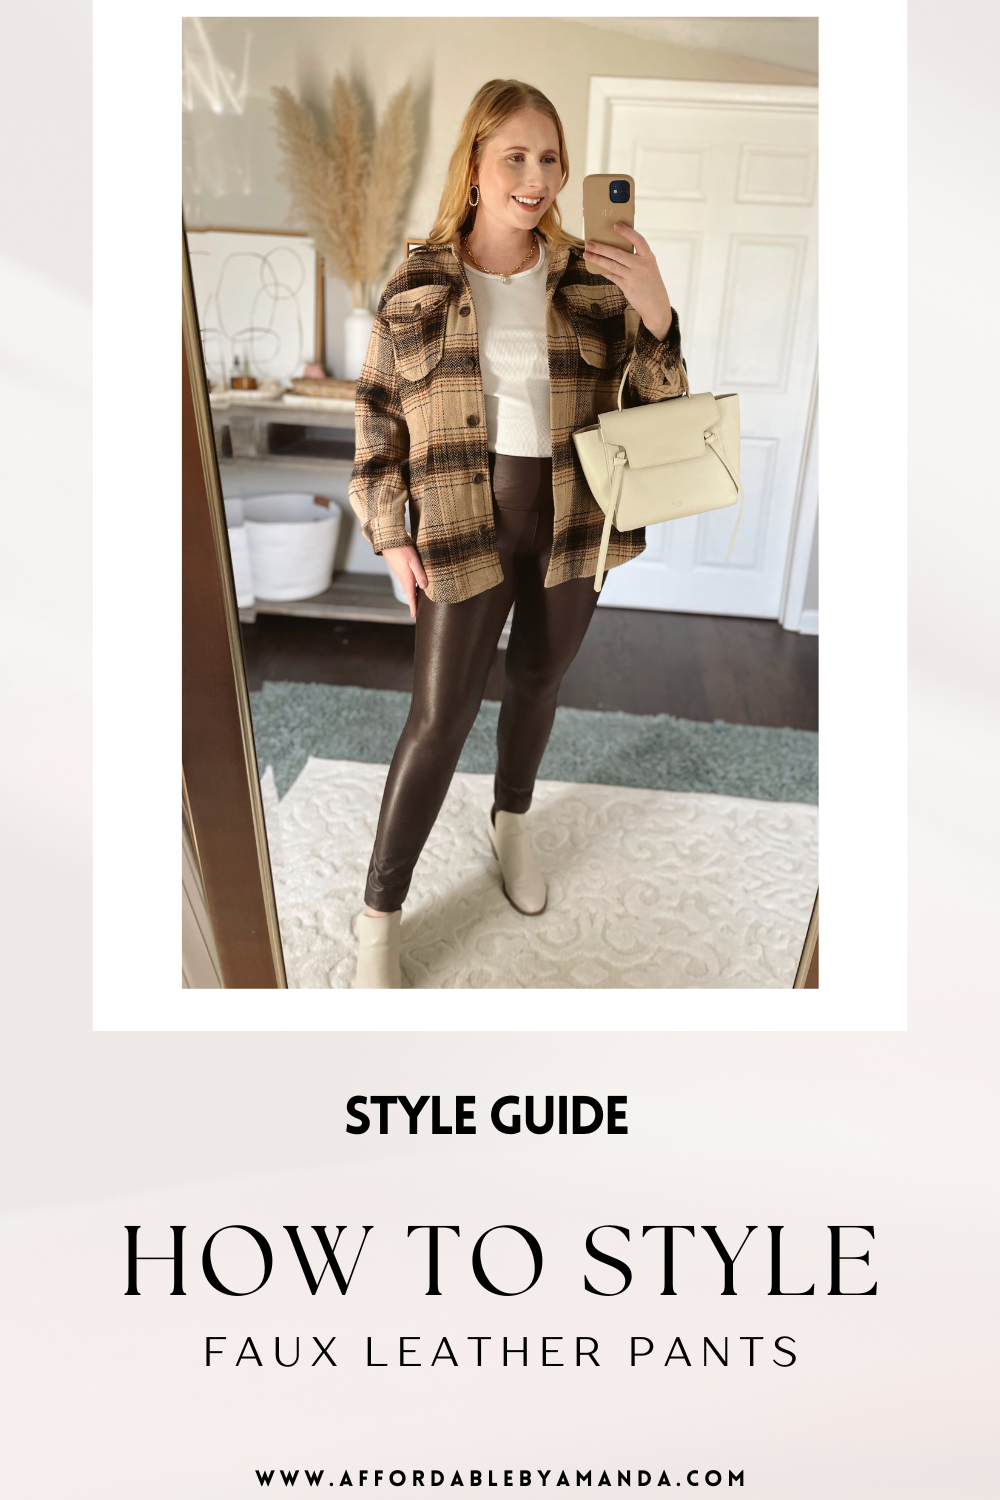 HOW TO STYLE FAUX LEATHER PANTS FOR FALL